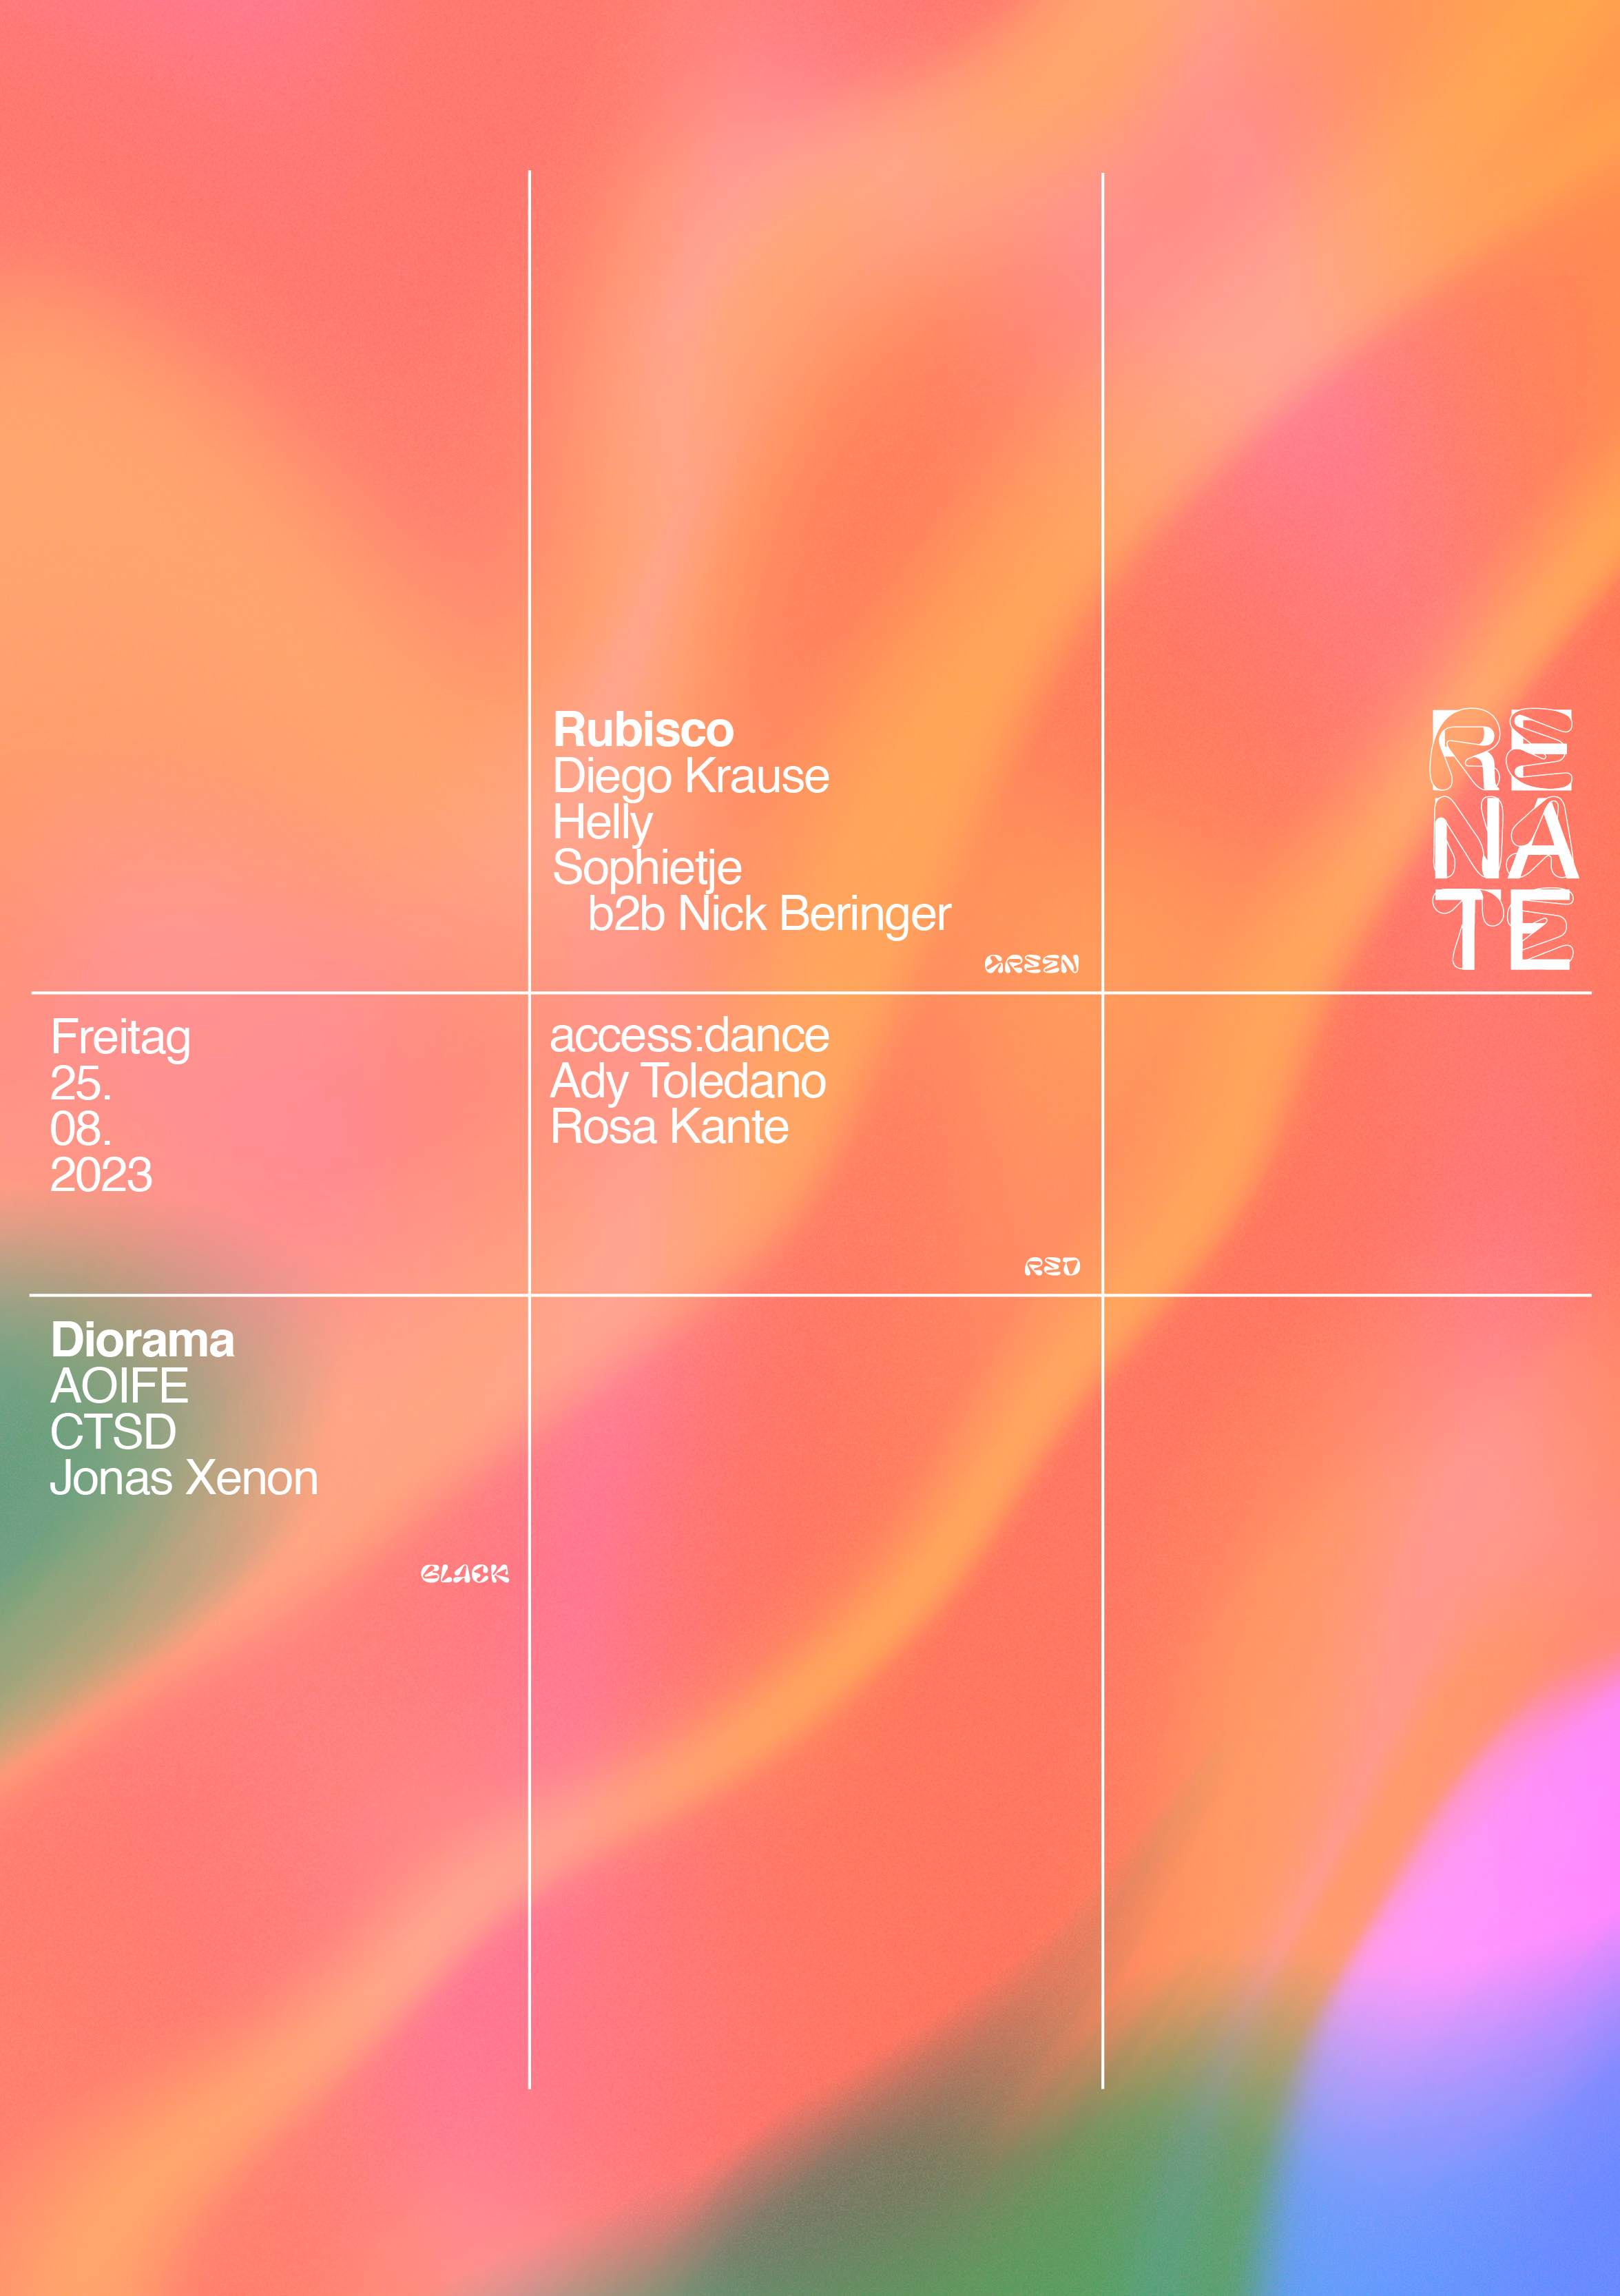 Renate with Helly, Nick Beringer, Ady Toledano, Diego Krause, AOIFE, CTSD + more - Página frontal